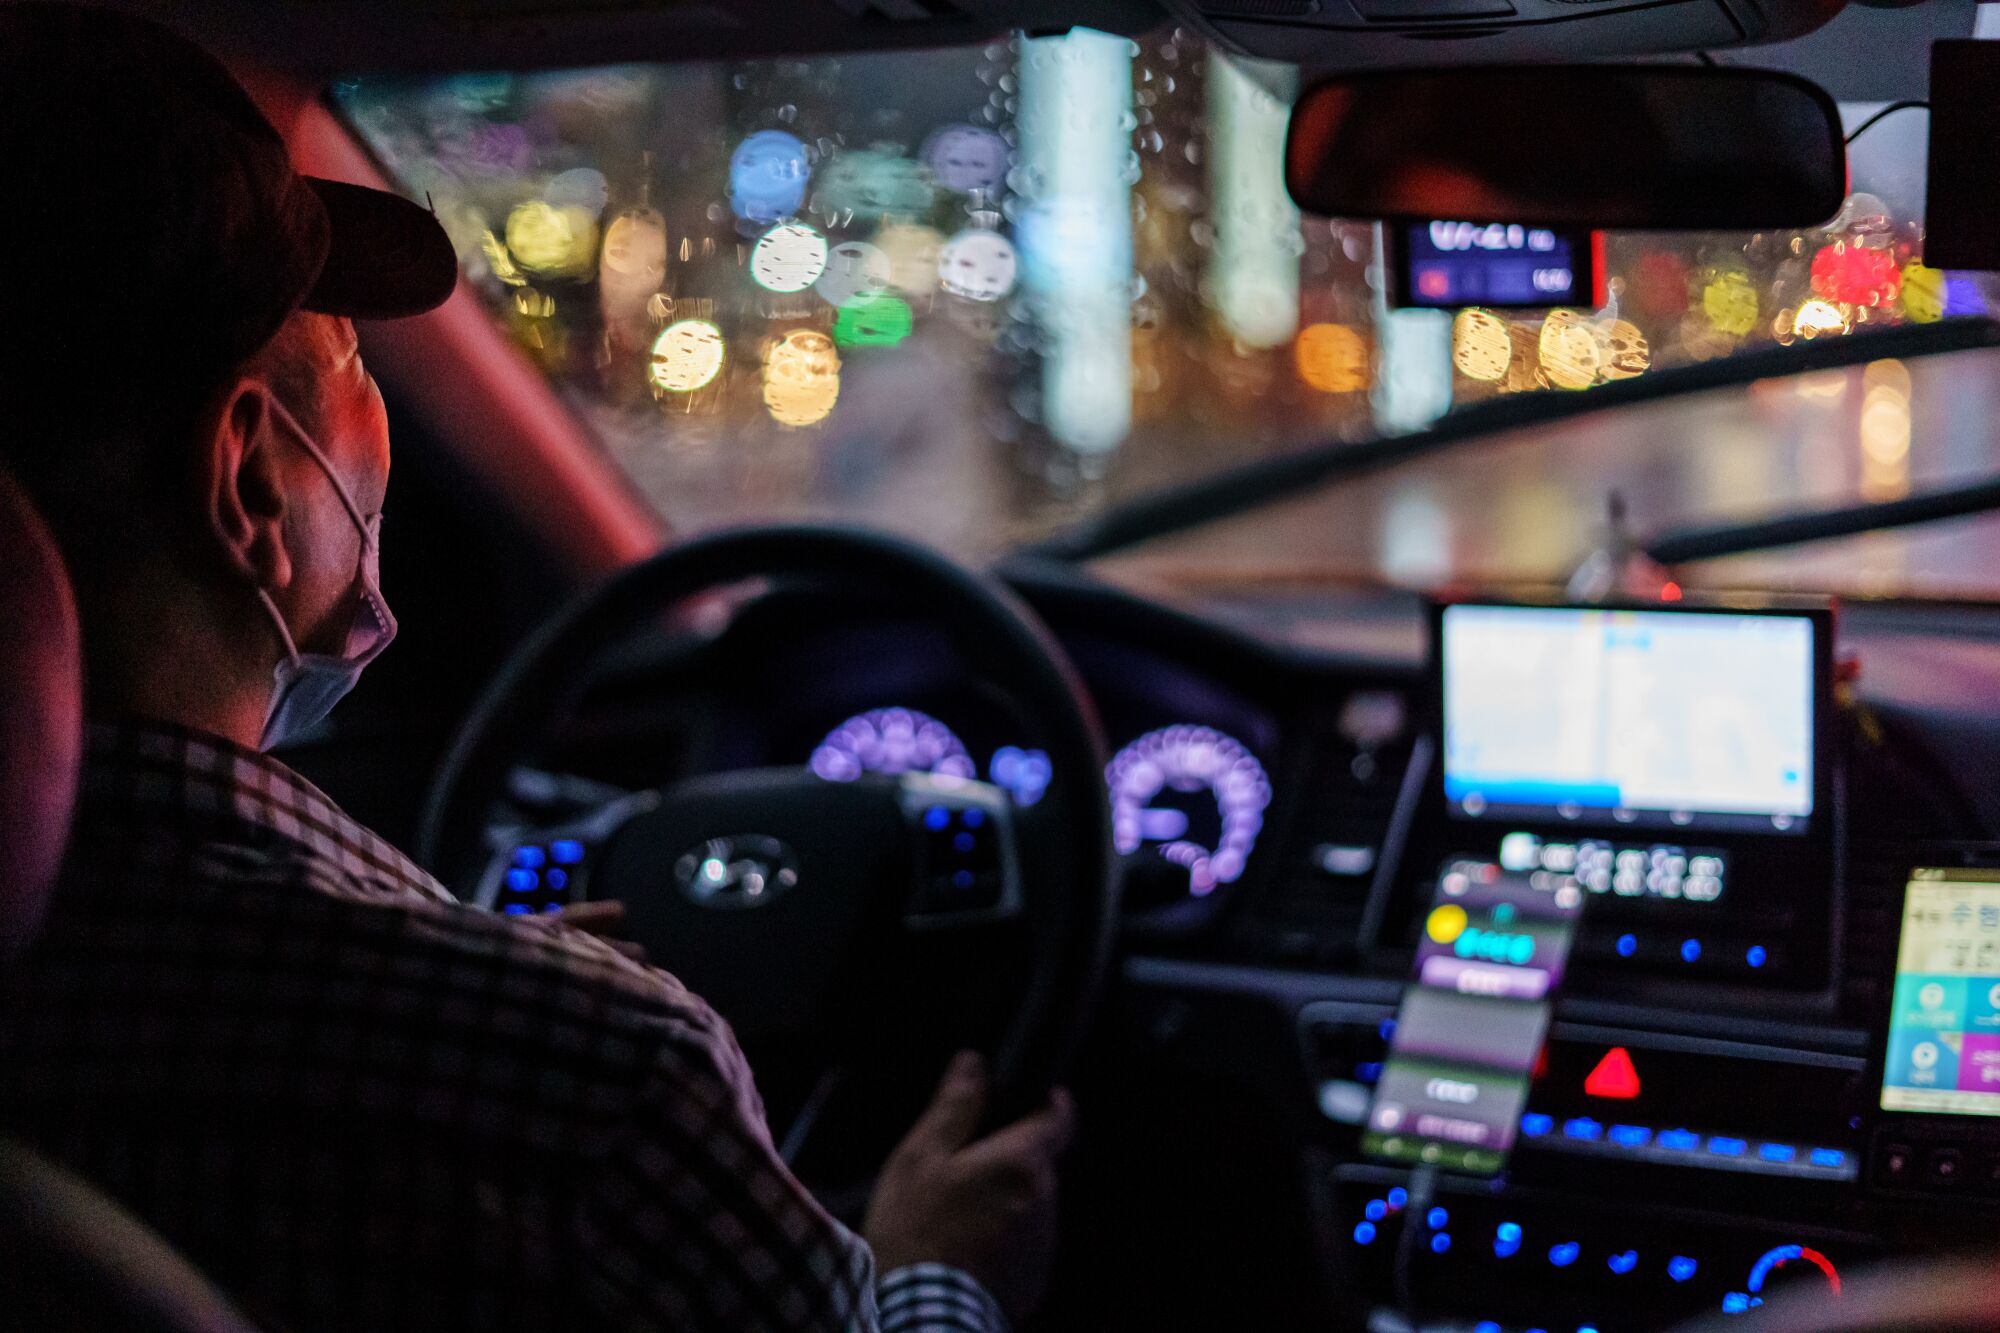  A taxi driver navigates the rainy weather during a fare in Seoul.